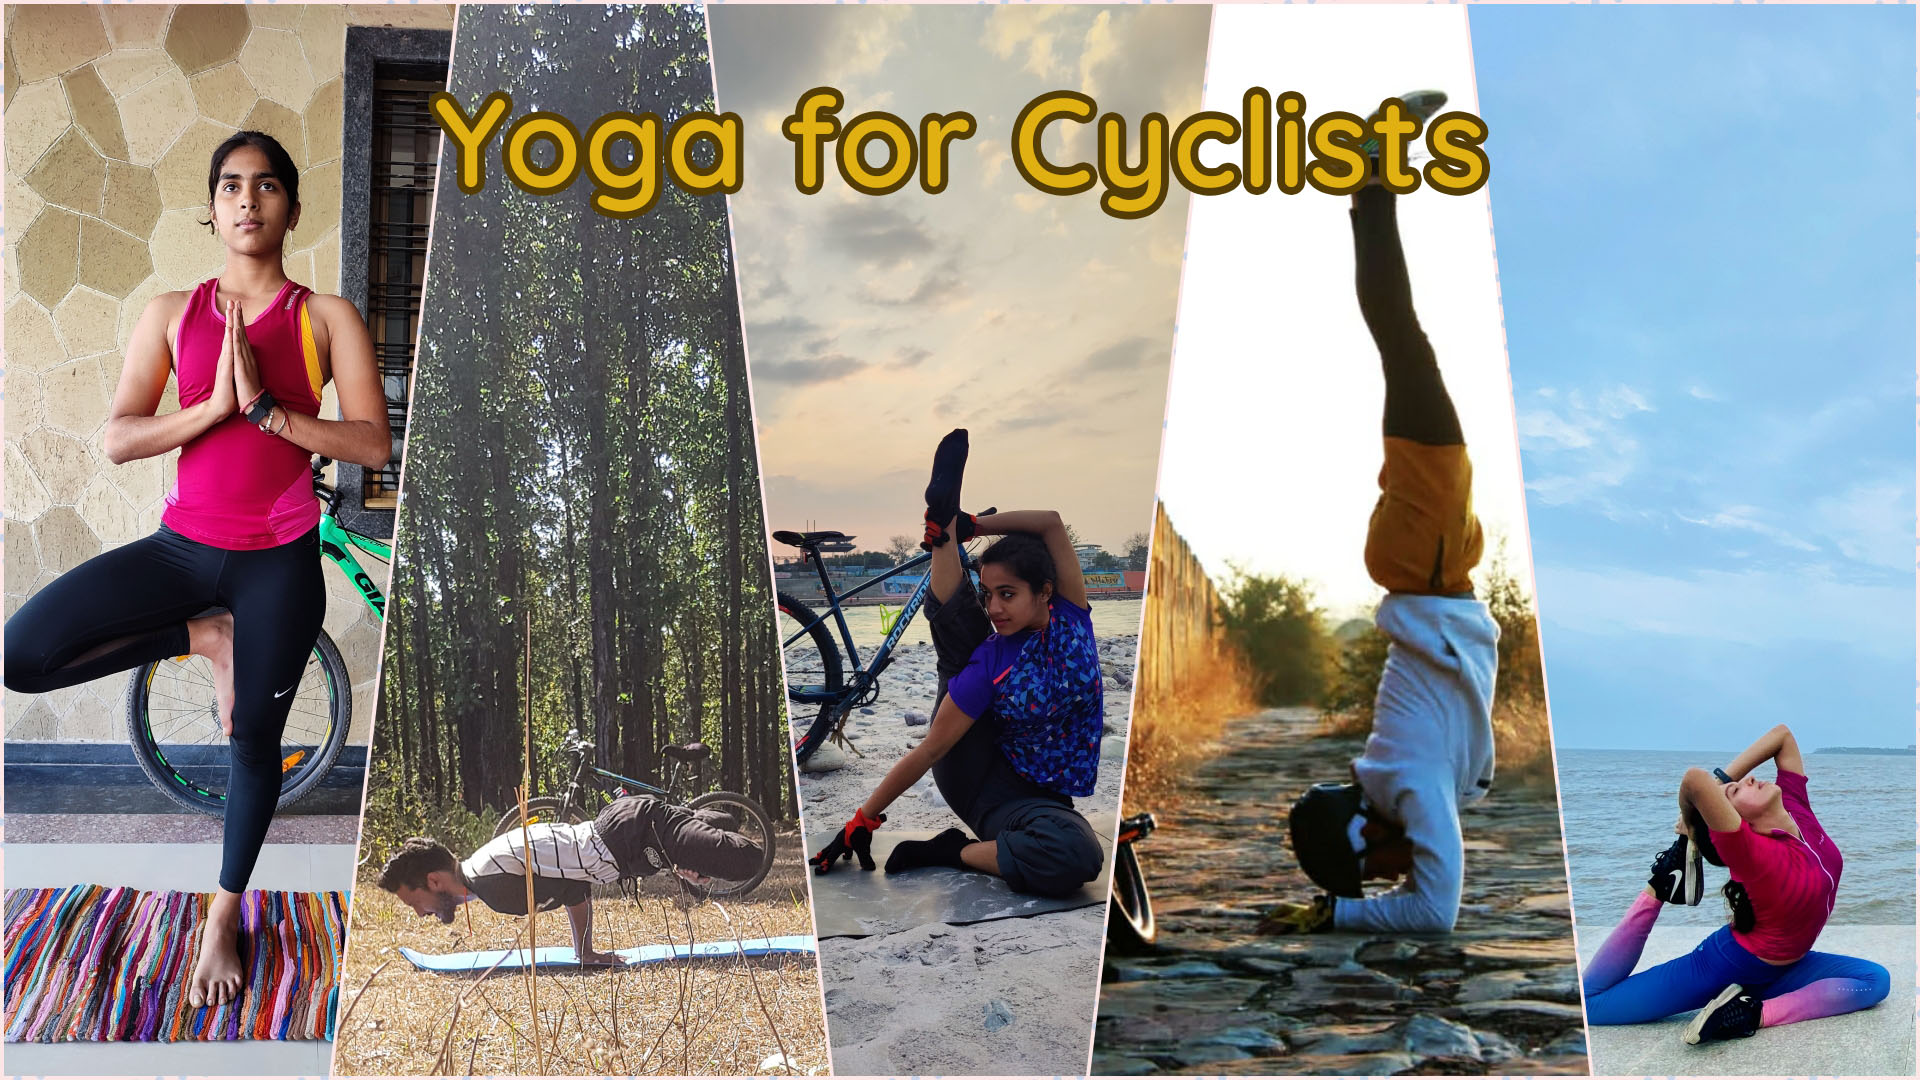 World of Cycling – Online Bike Shop  Yoga for cyclists, Cycling workout,  Yoga sequences